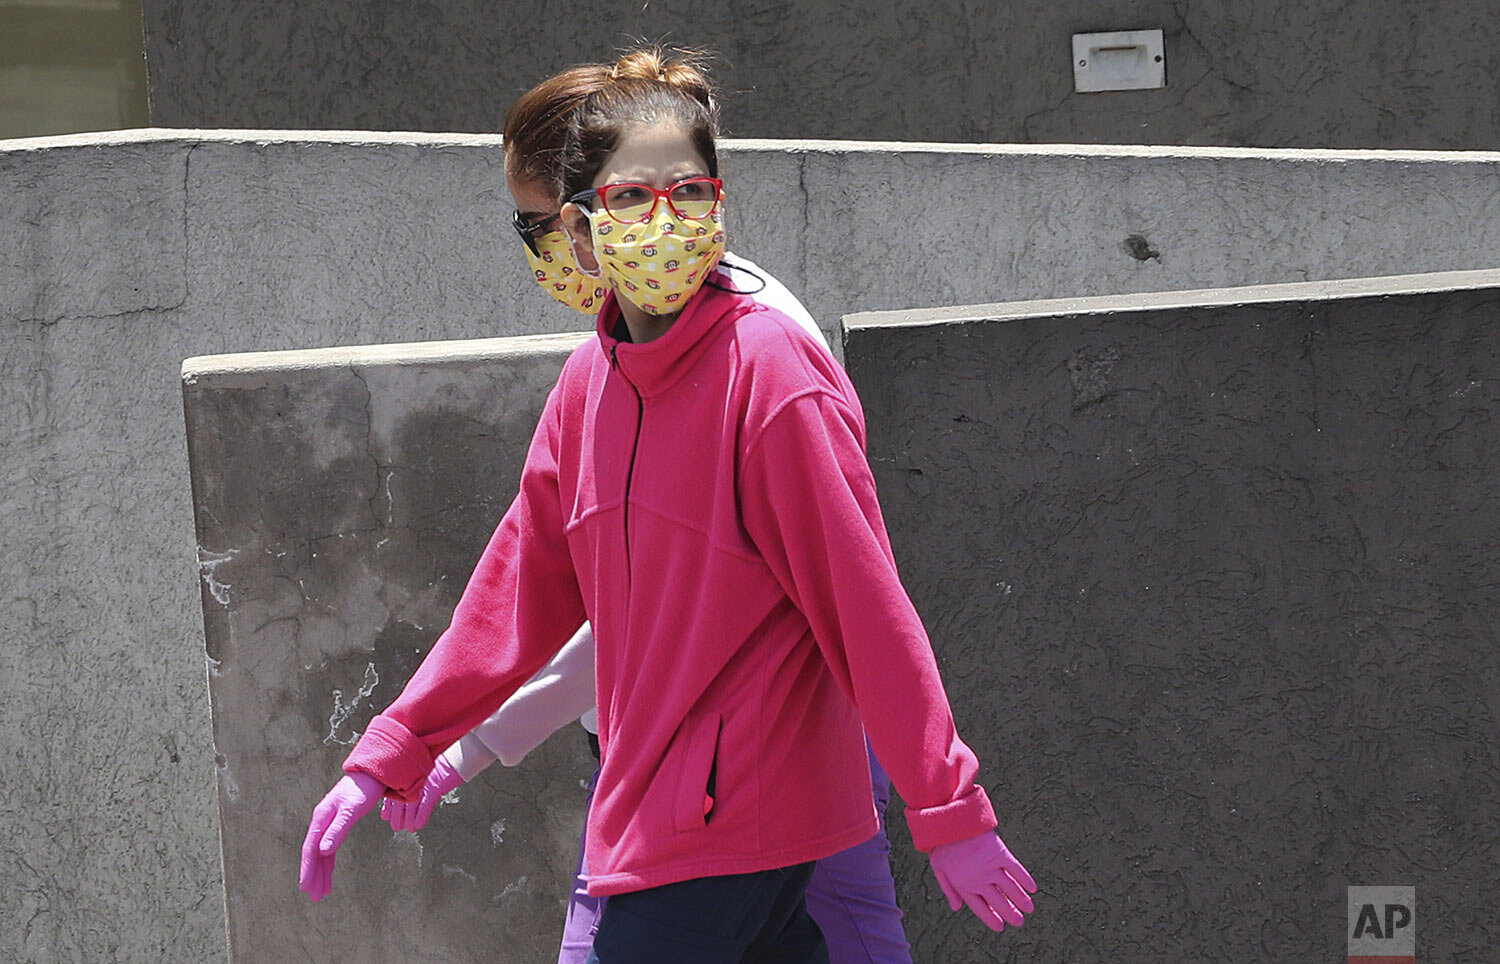  Women wear face masks and gloves as a precaution against the spread of the new coronavirus, in Quito, Ecuador, March 19, 2020. (AP Photo/Dolores Ochoa) 